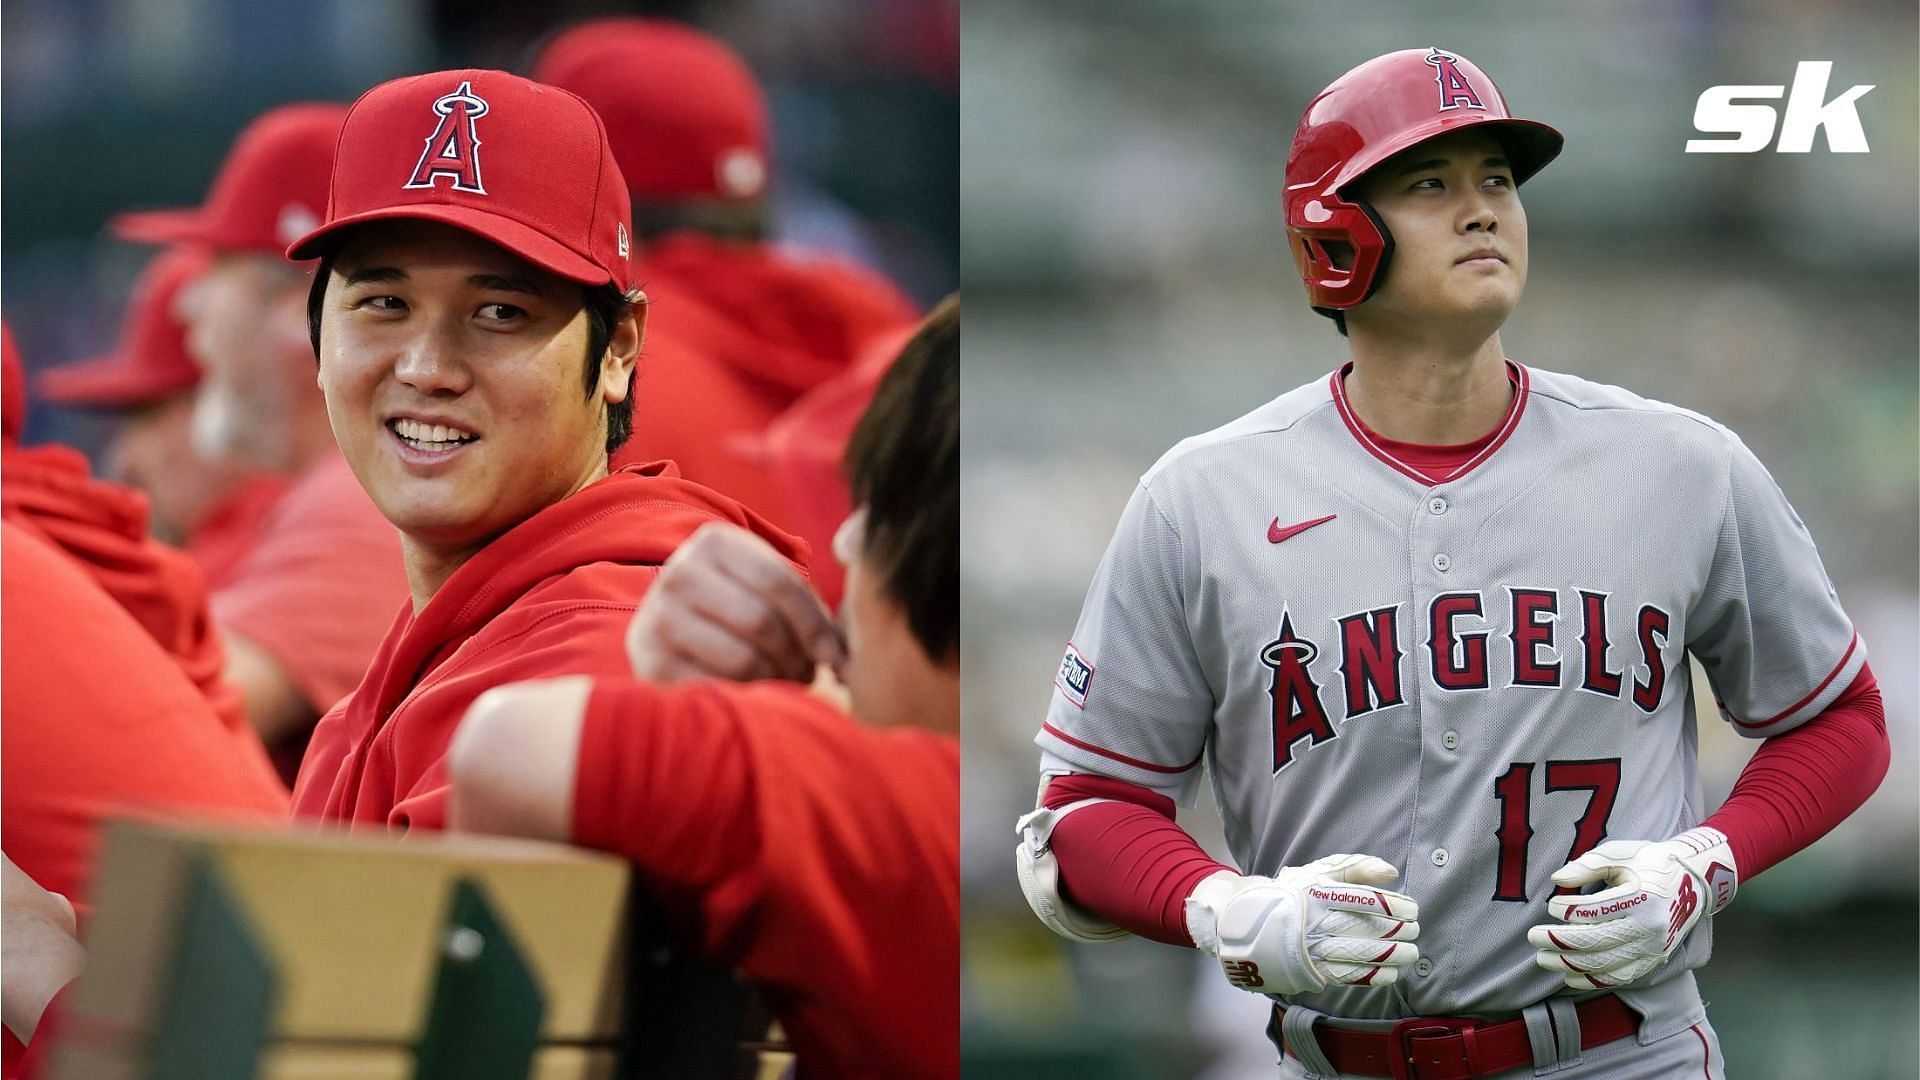 Shohei Ohtani will have a documentary showcasing his story coming out on November 17